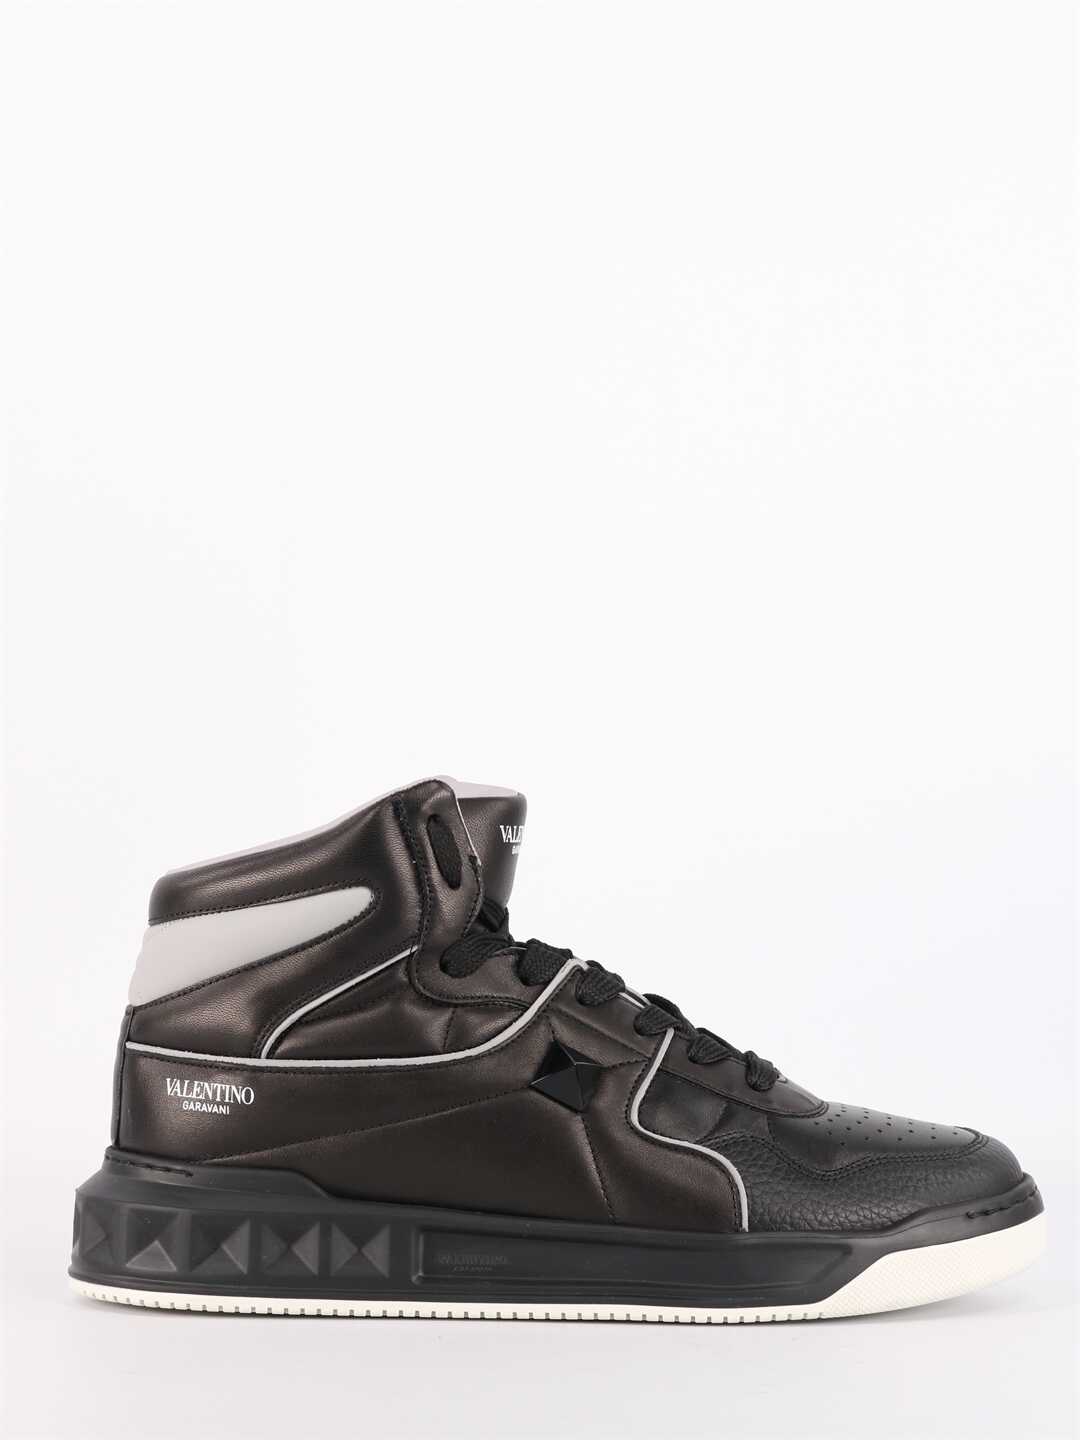 Valentino Garavani Sneakers Mid-Top One Stud In Leather WY2S0E63 NWN Black